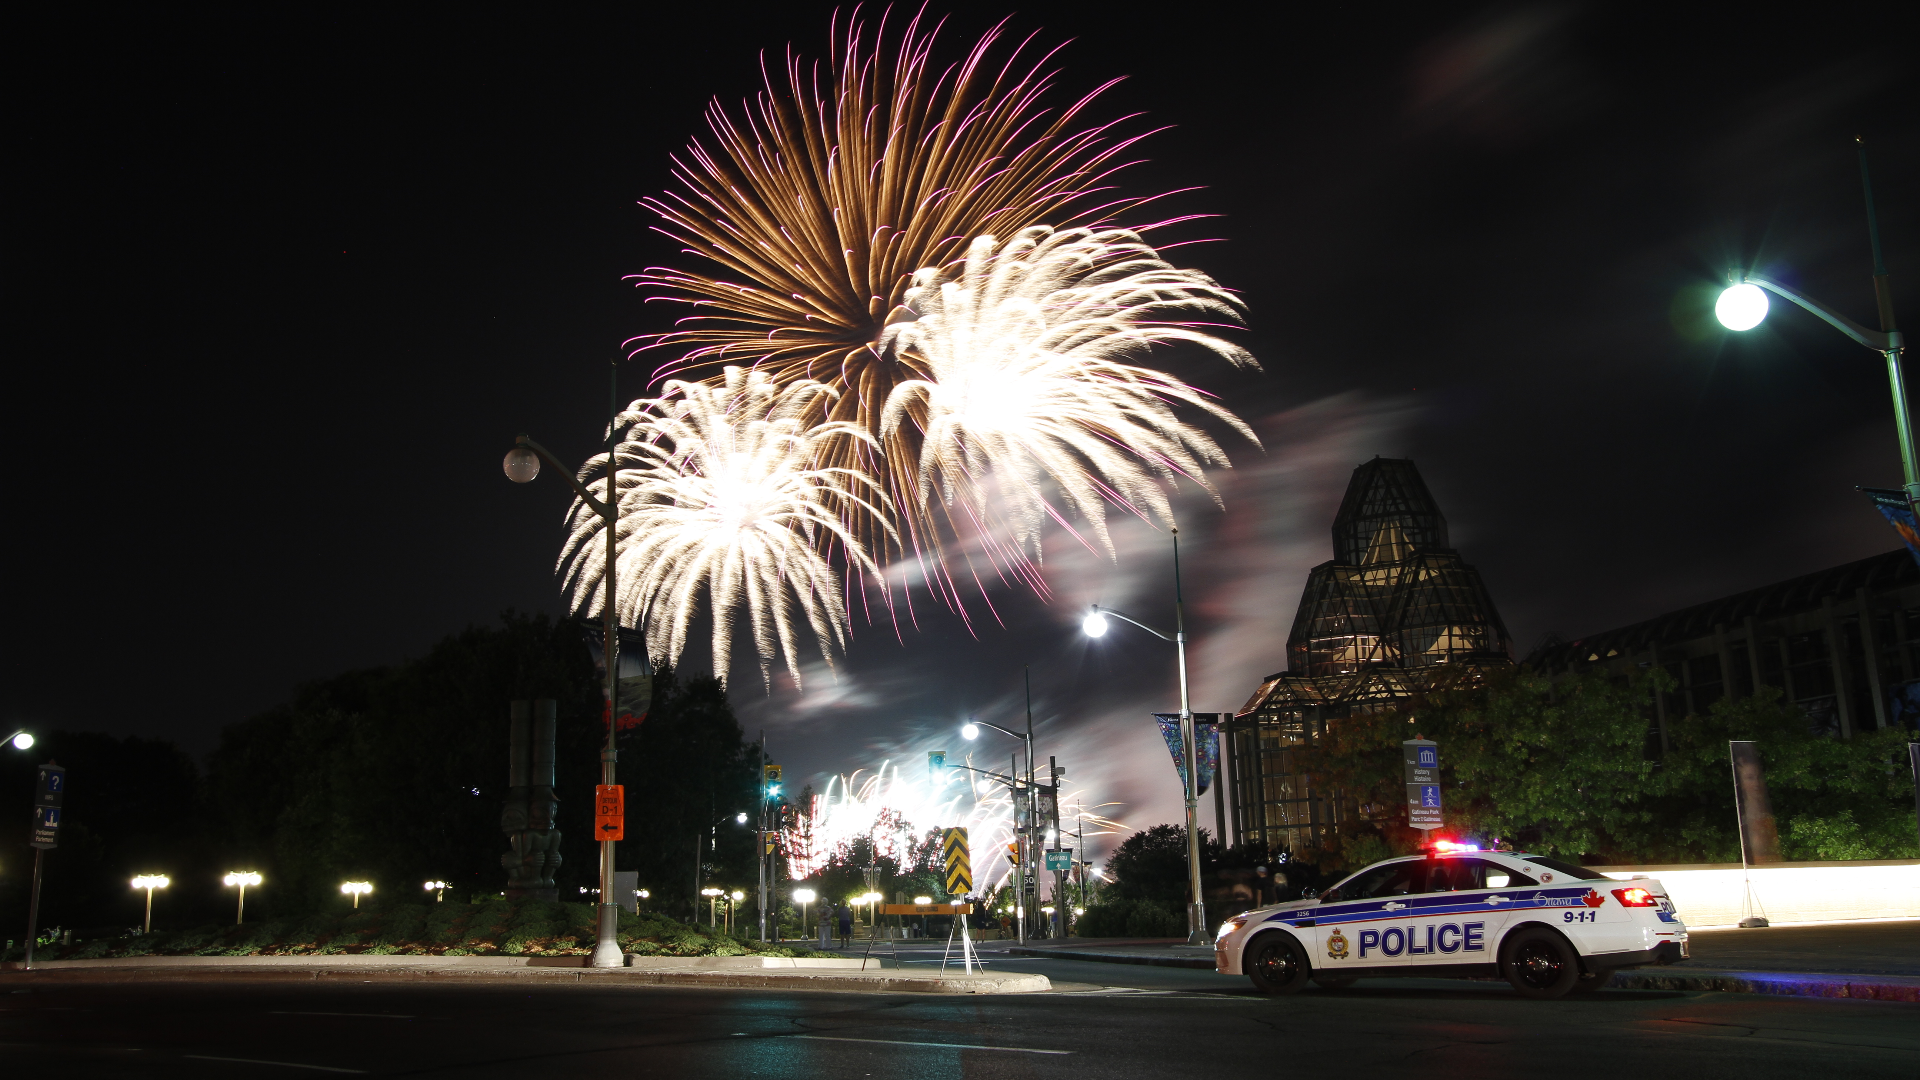 Police cruiser parked in front of a Canada Day fireworks display